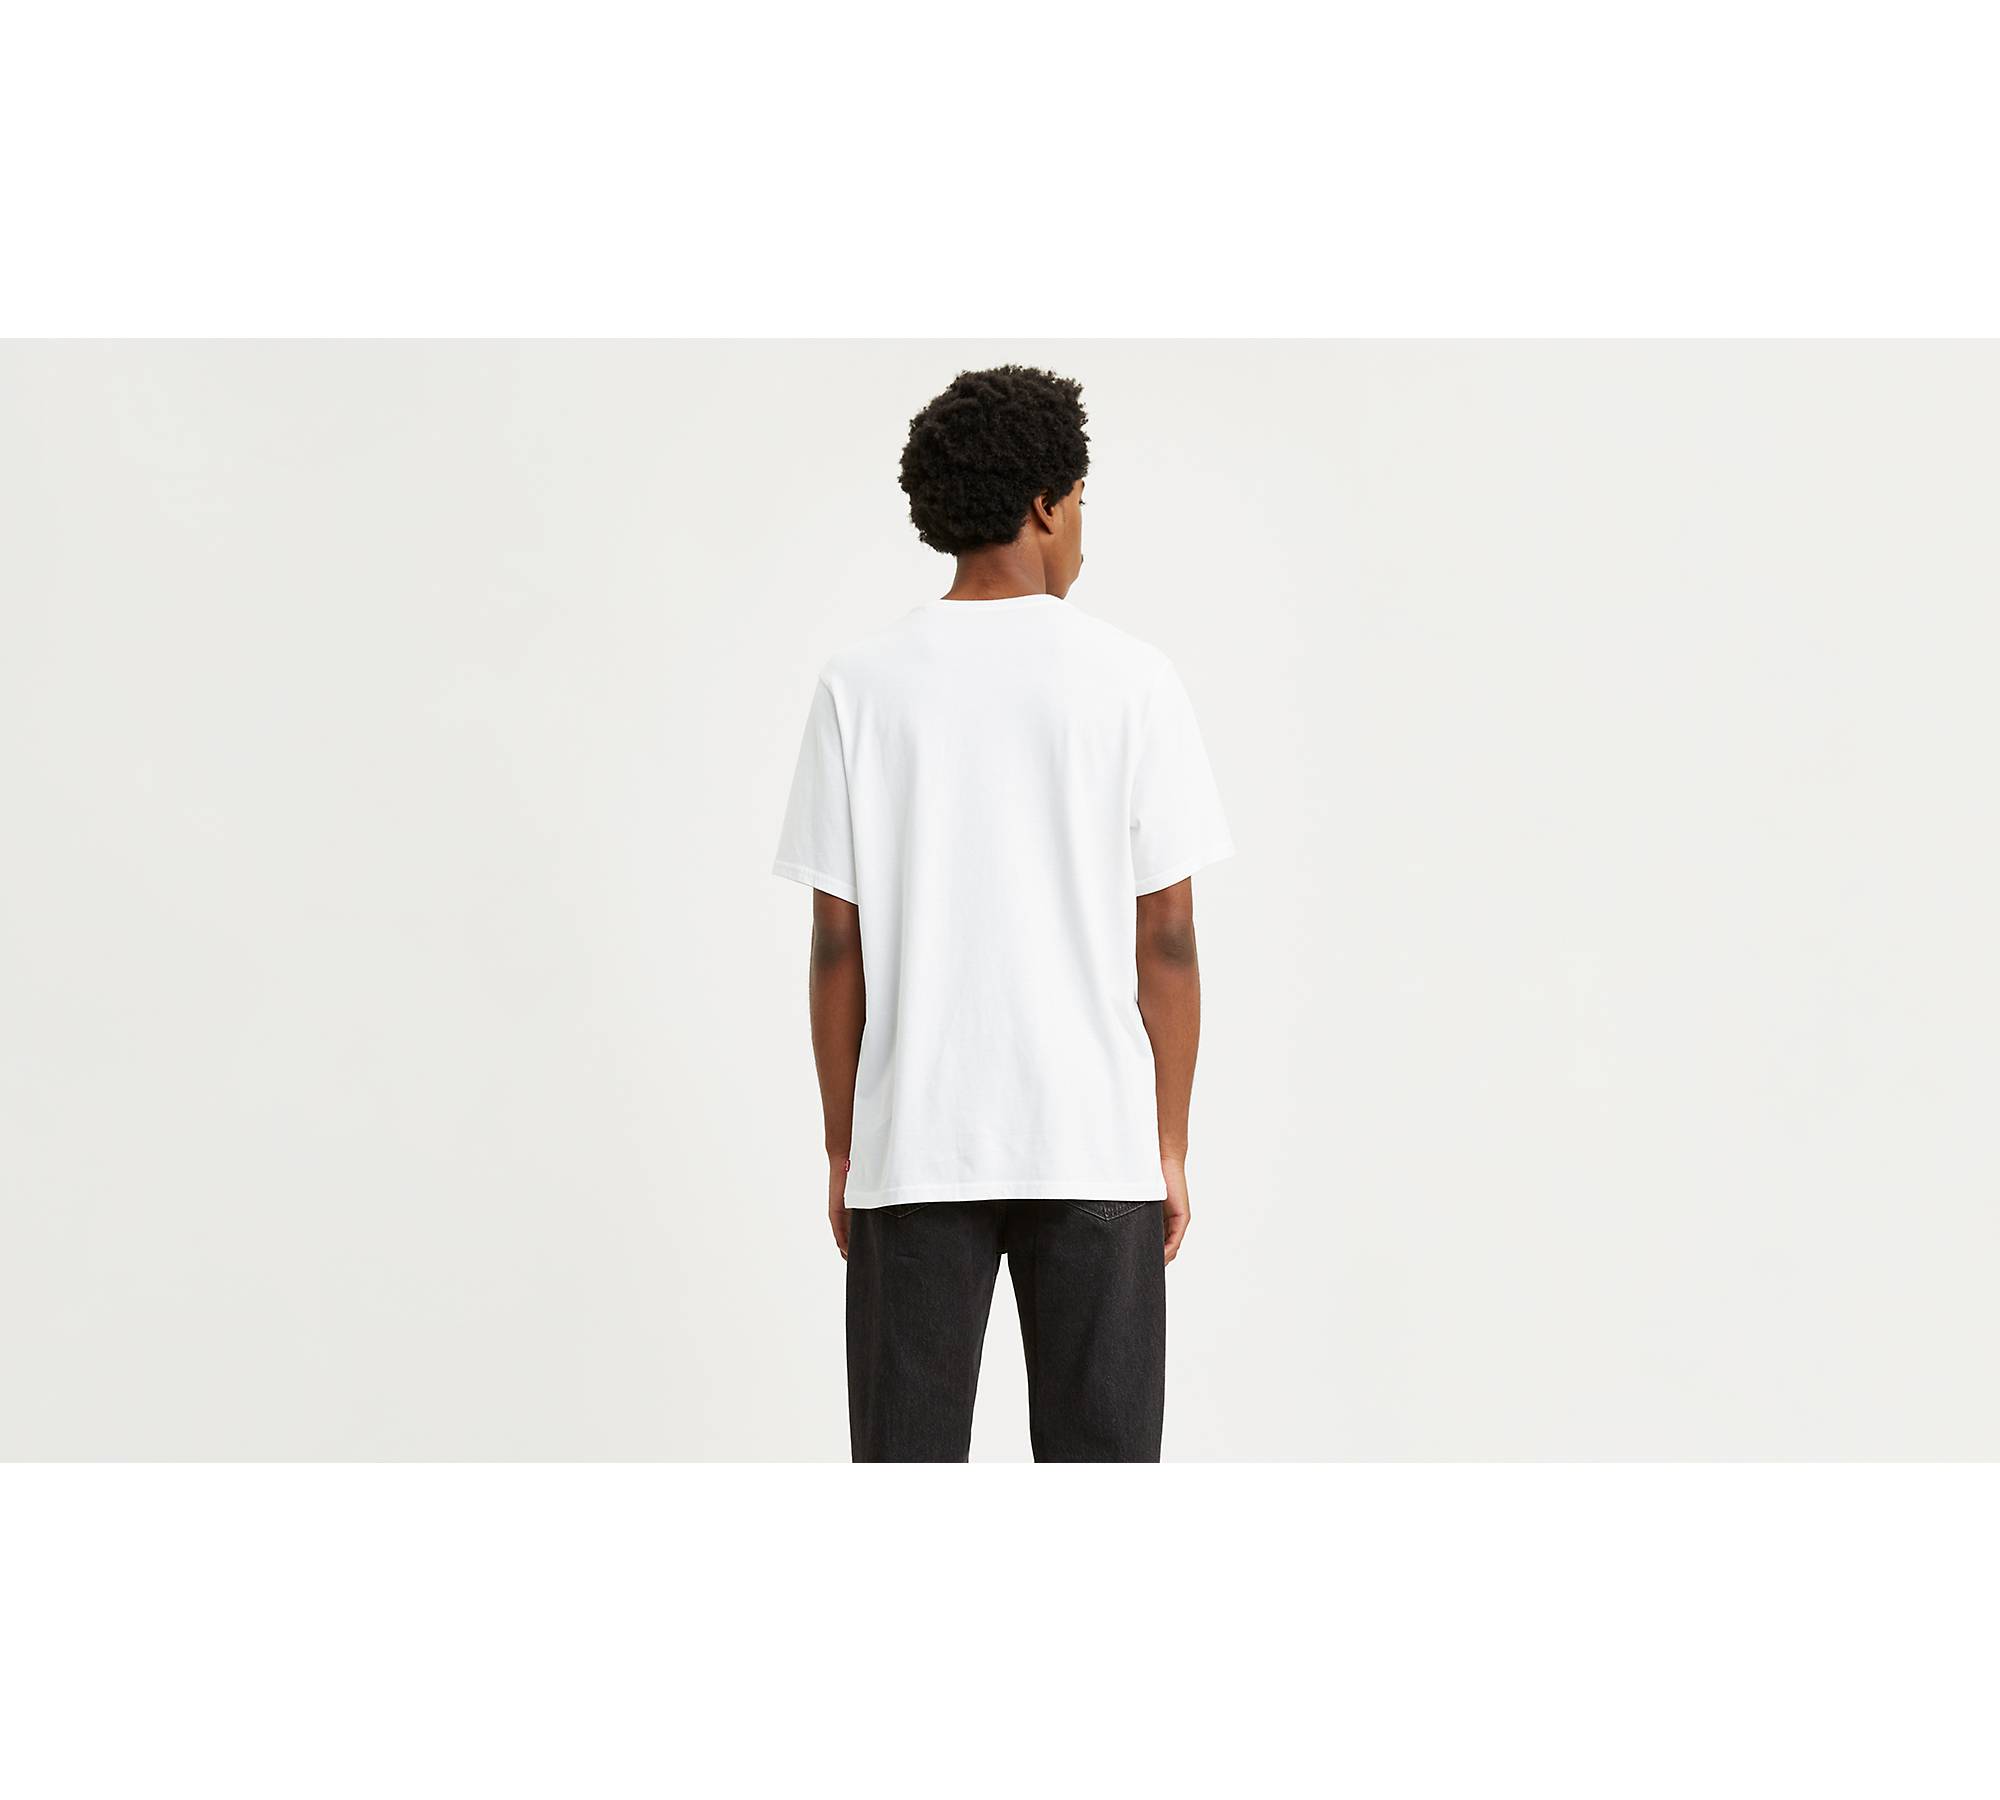 90's Serif Logo Relaxed Graphic Tee Shirt - White | Levi's® US